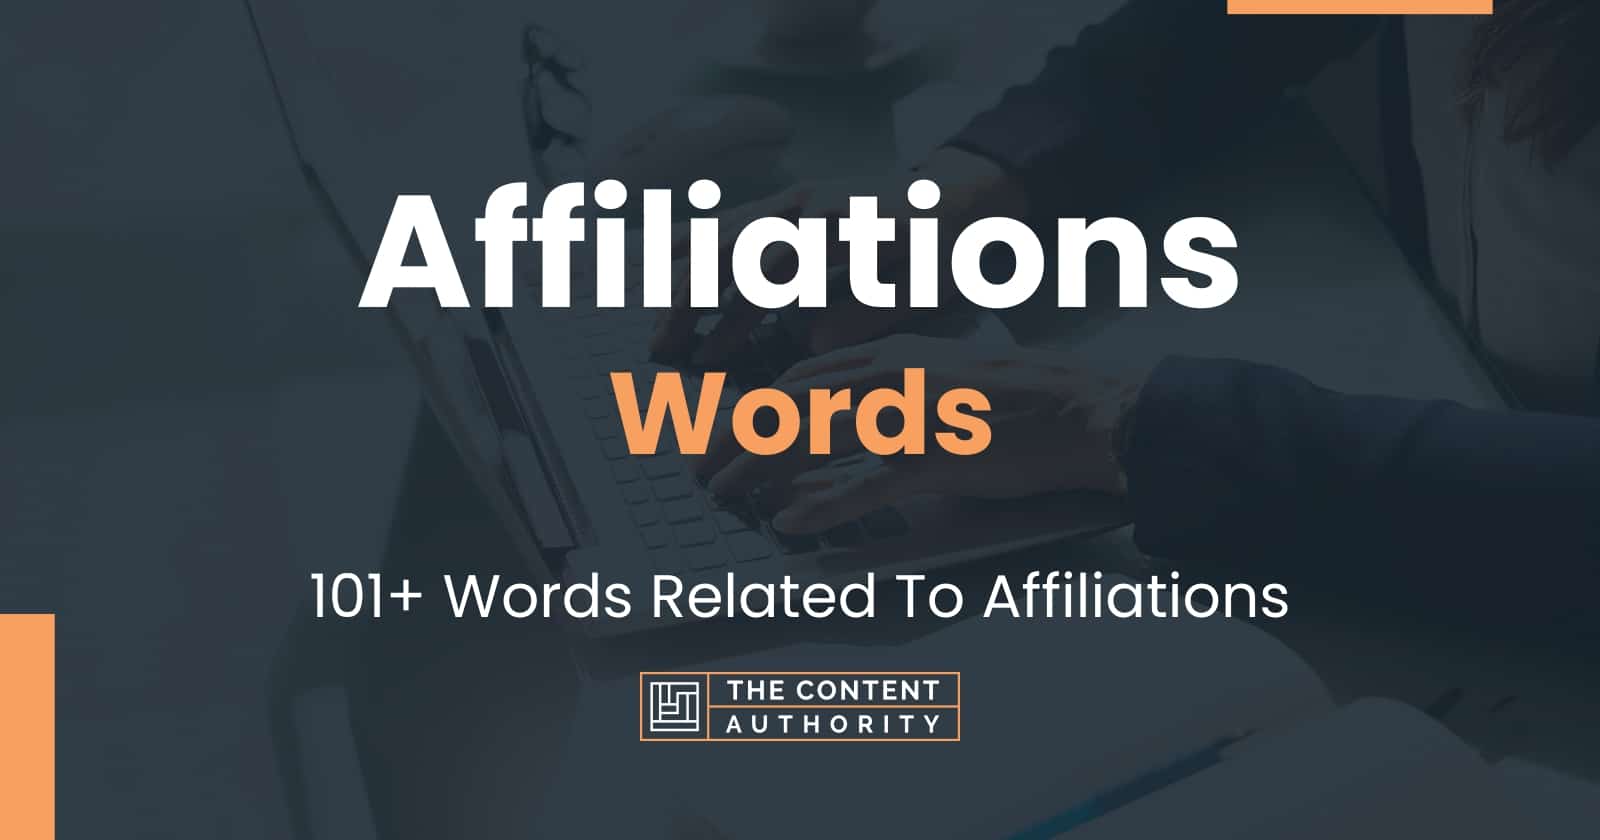 Affiliations Words - 101+ Words Related To Affiliations